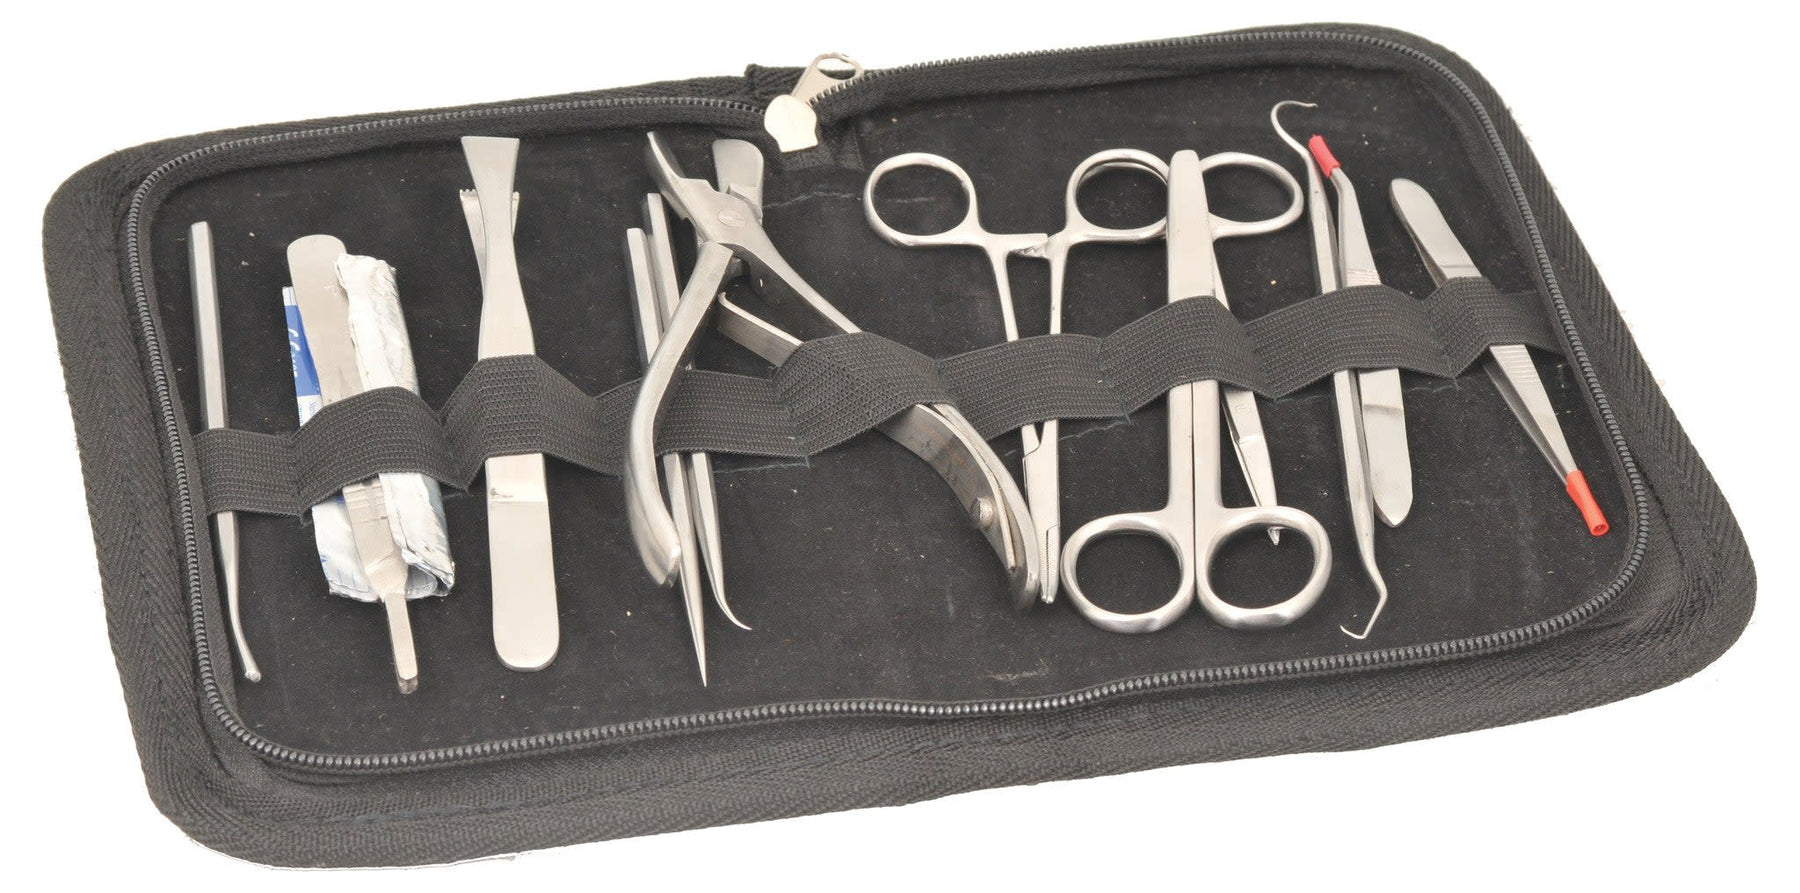 Dissection Set, Instructor, 12 Pcs - Stainless Steel - Leather Storage Case